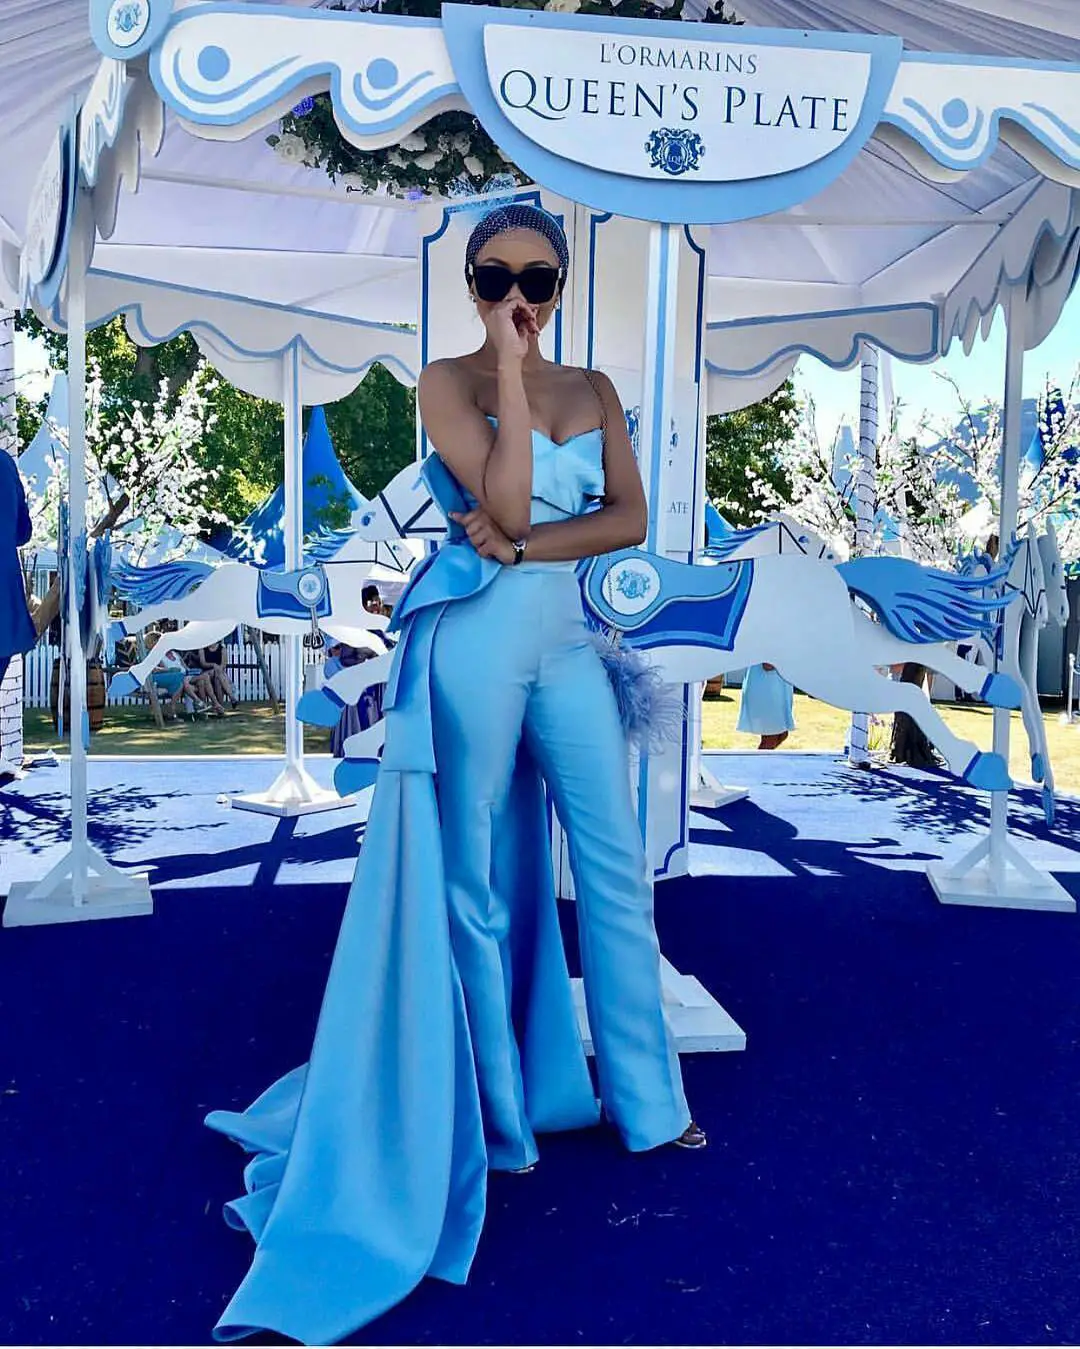 Gorgeous Fashion Scene At The 2018 L’Ormarins Queen’s Plate Racing Festival